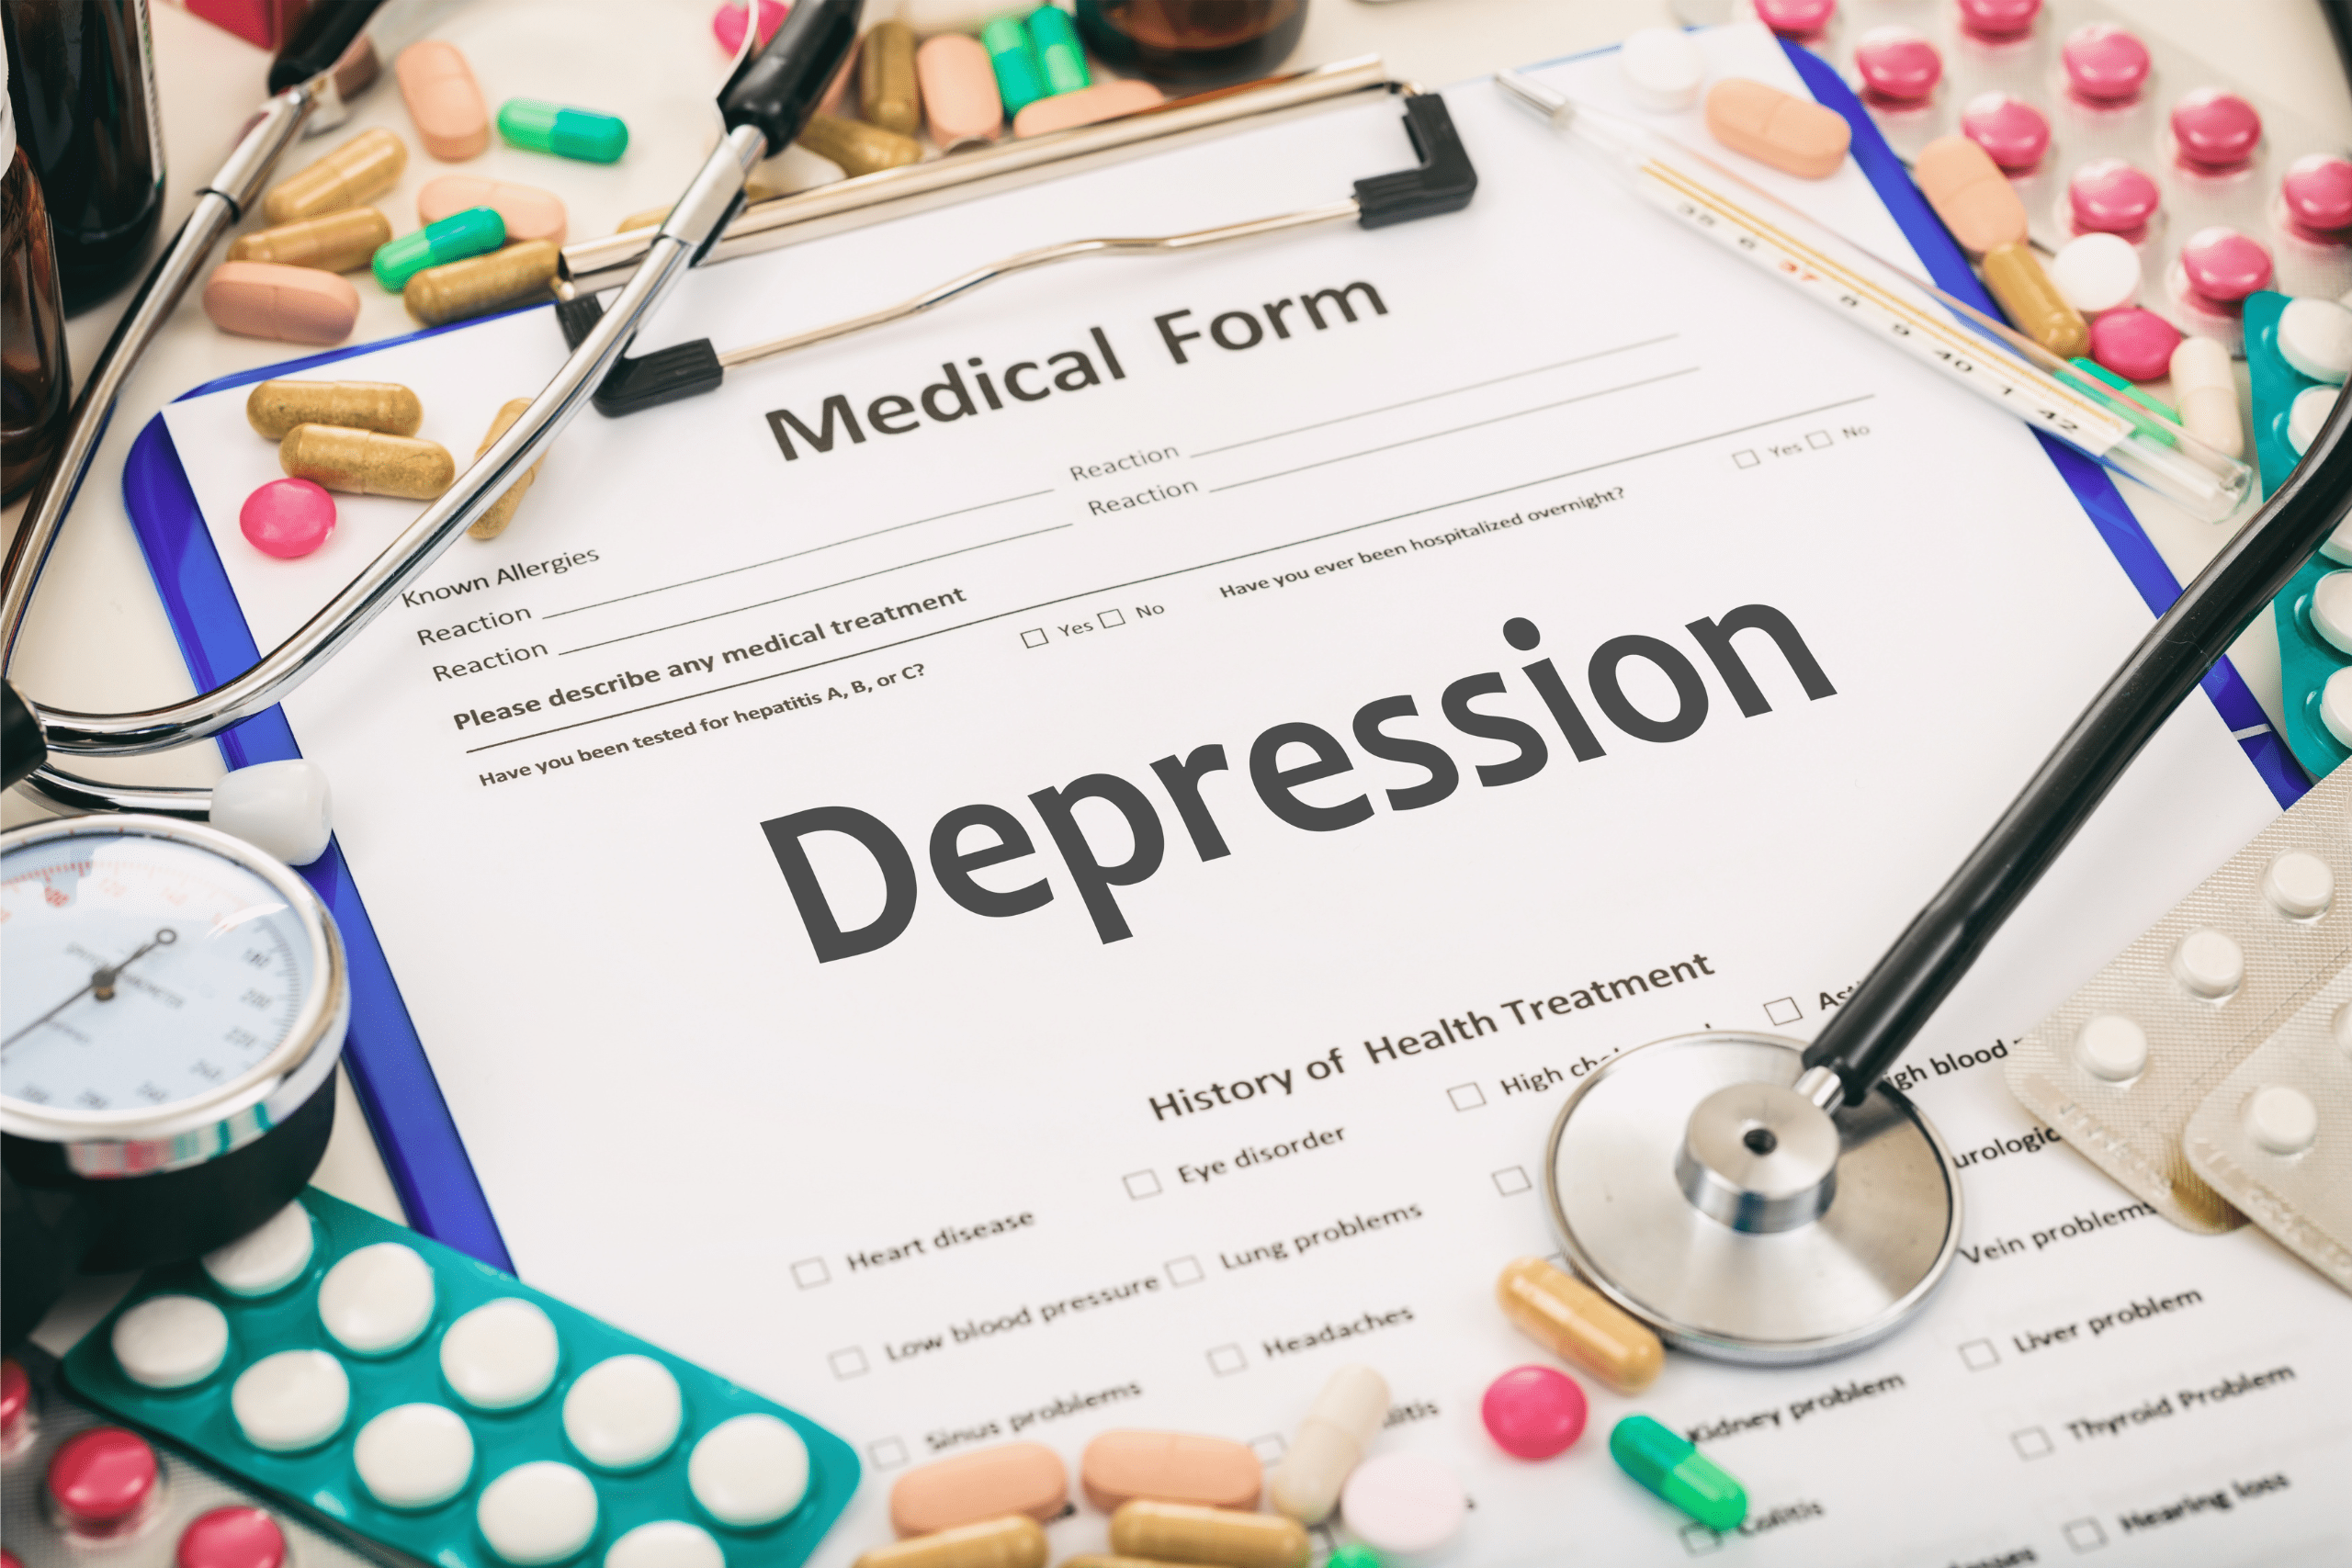 FDA Approves a New Medication for Clinical Depression